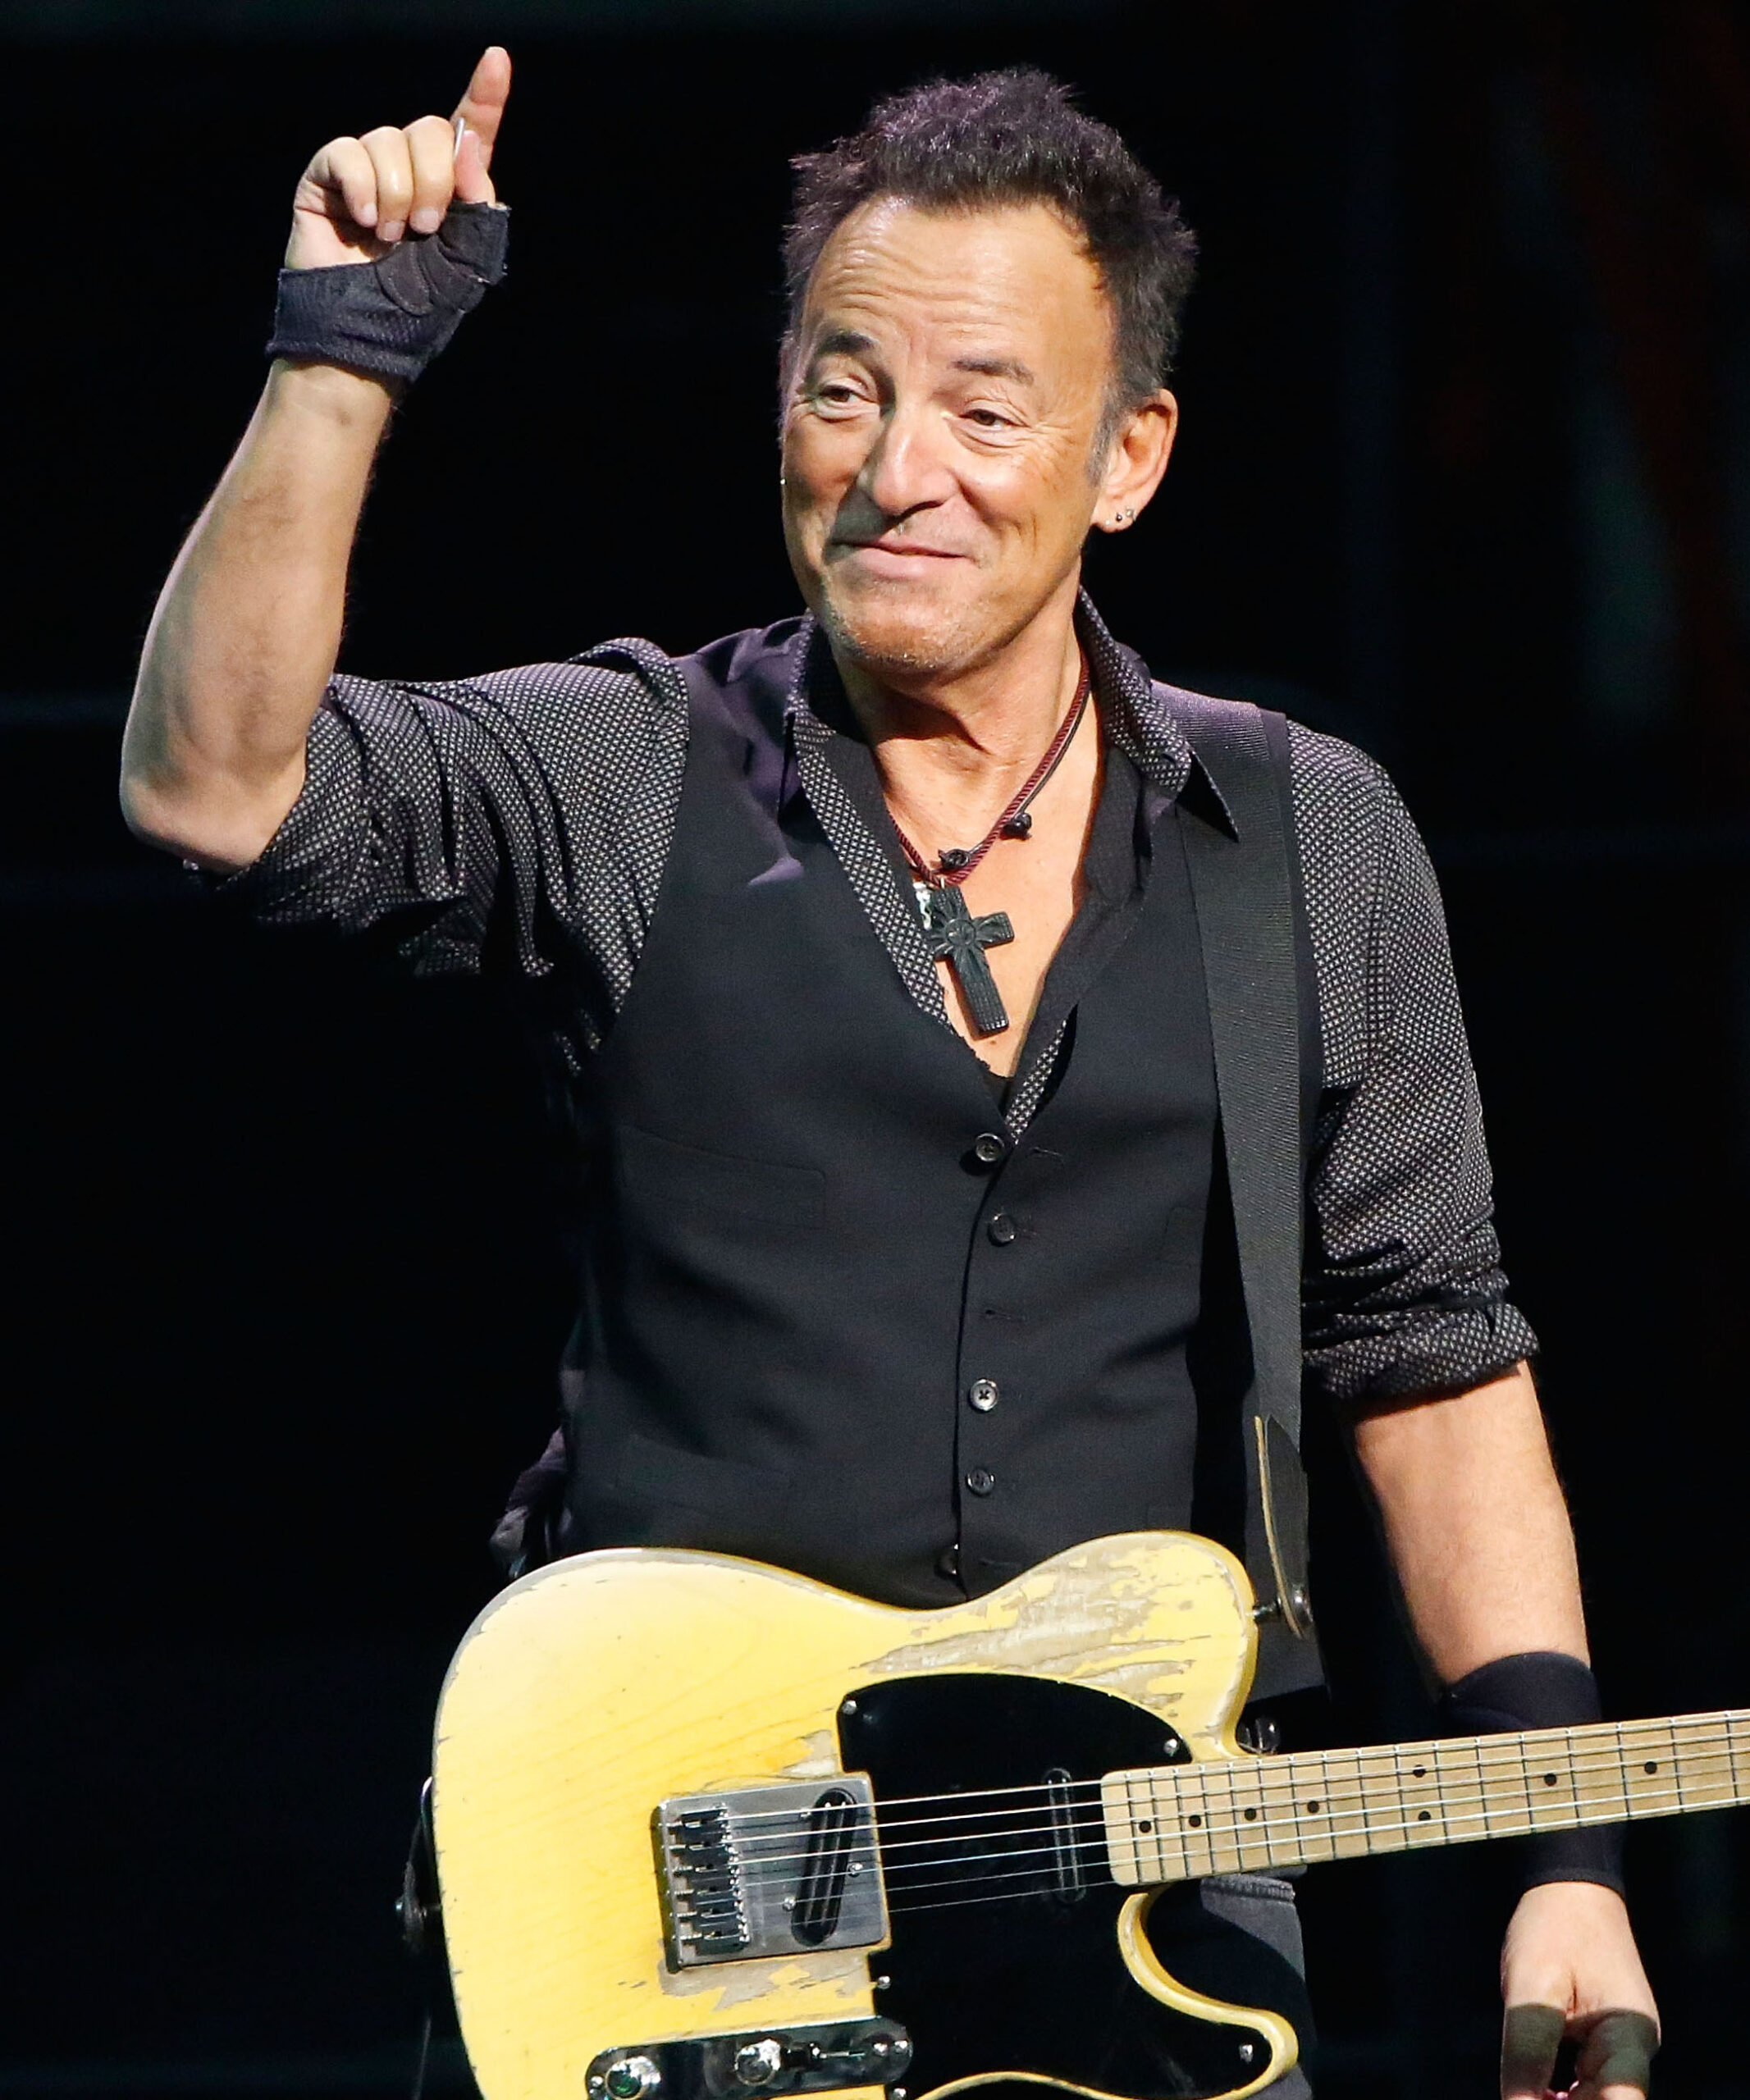 Dad writes note excusing daughter from school for Springsteen concert